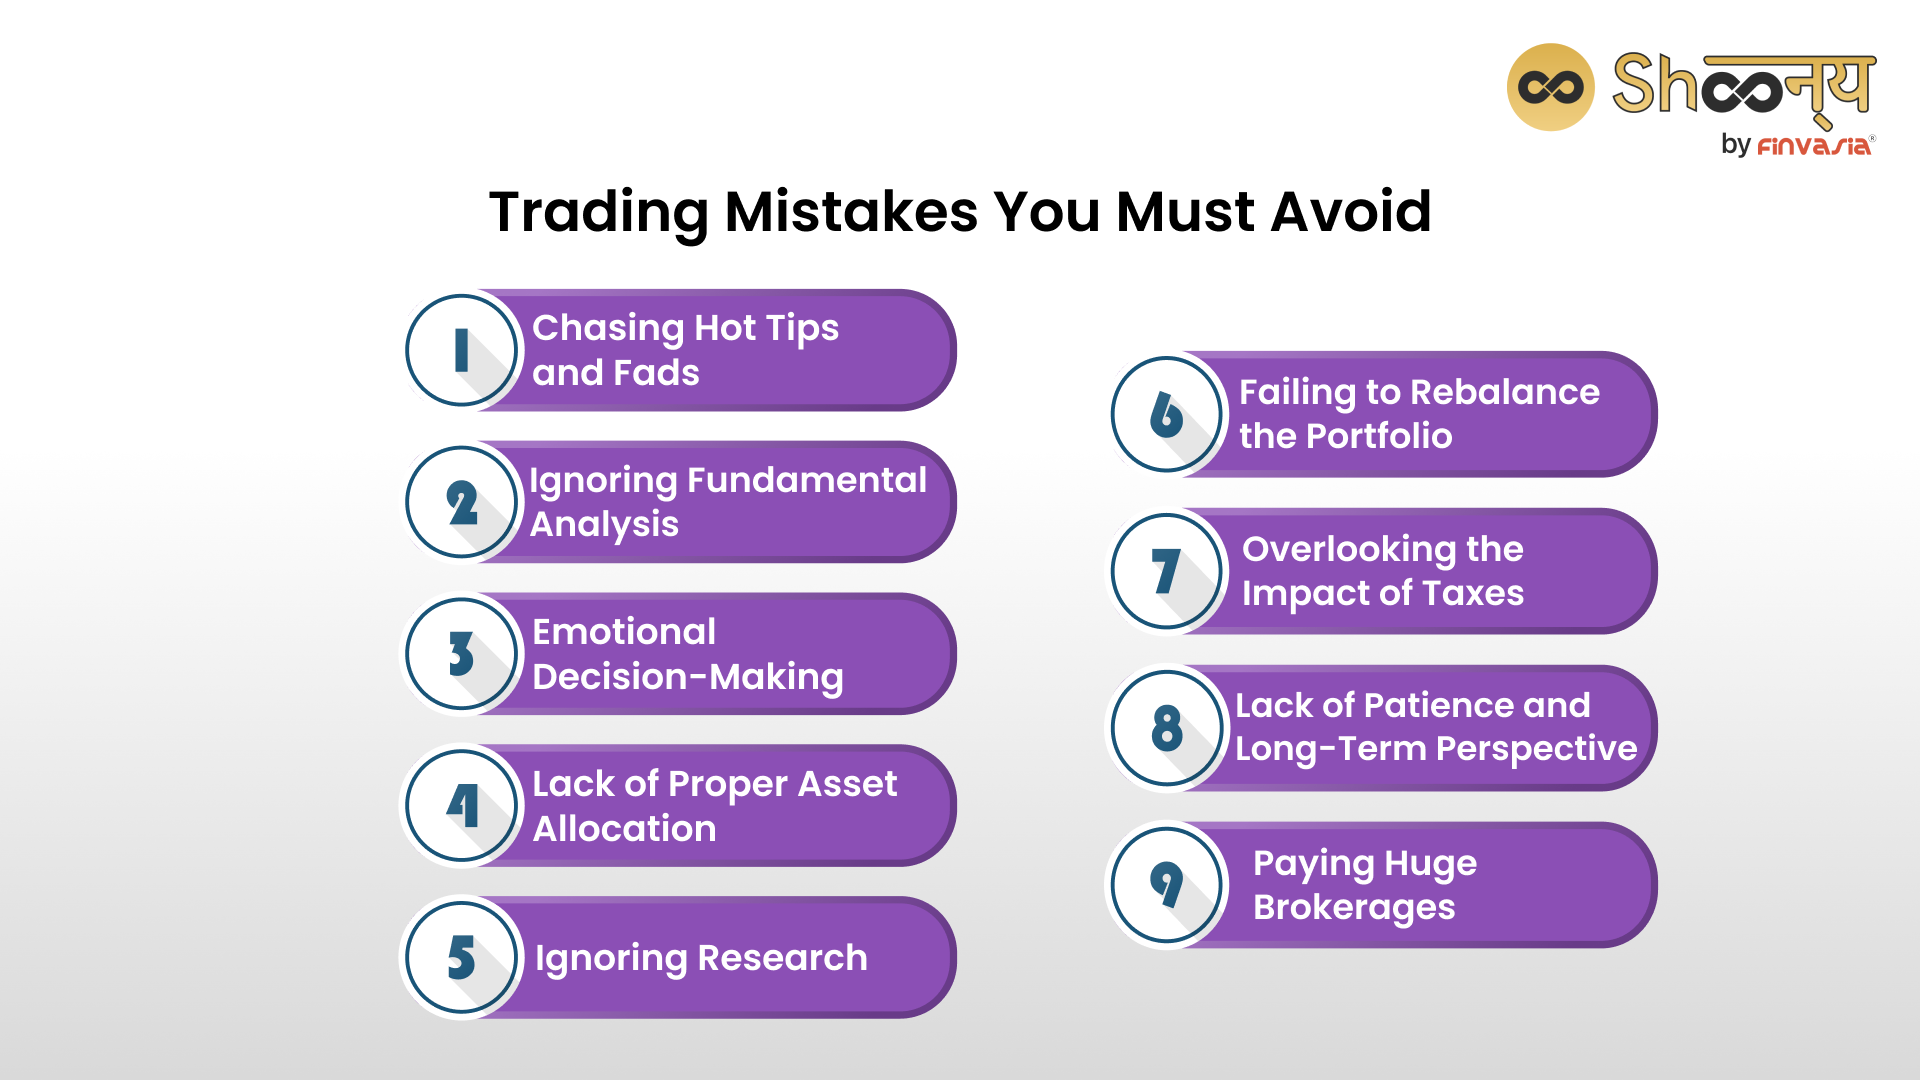 Trading Mistakes You Must Avoid